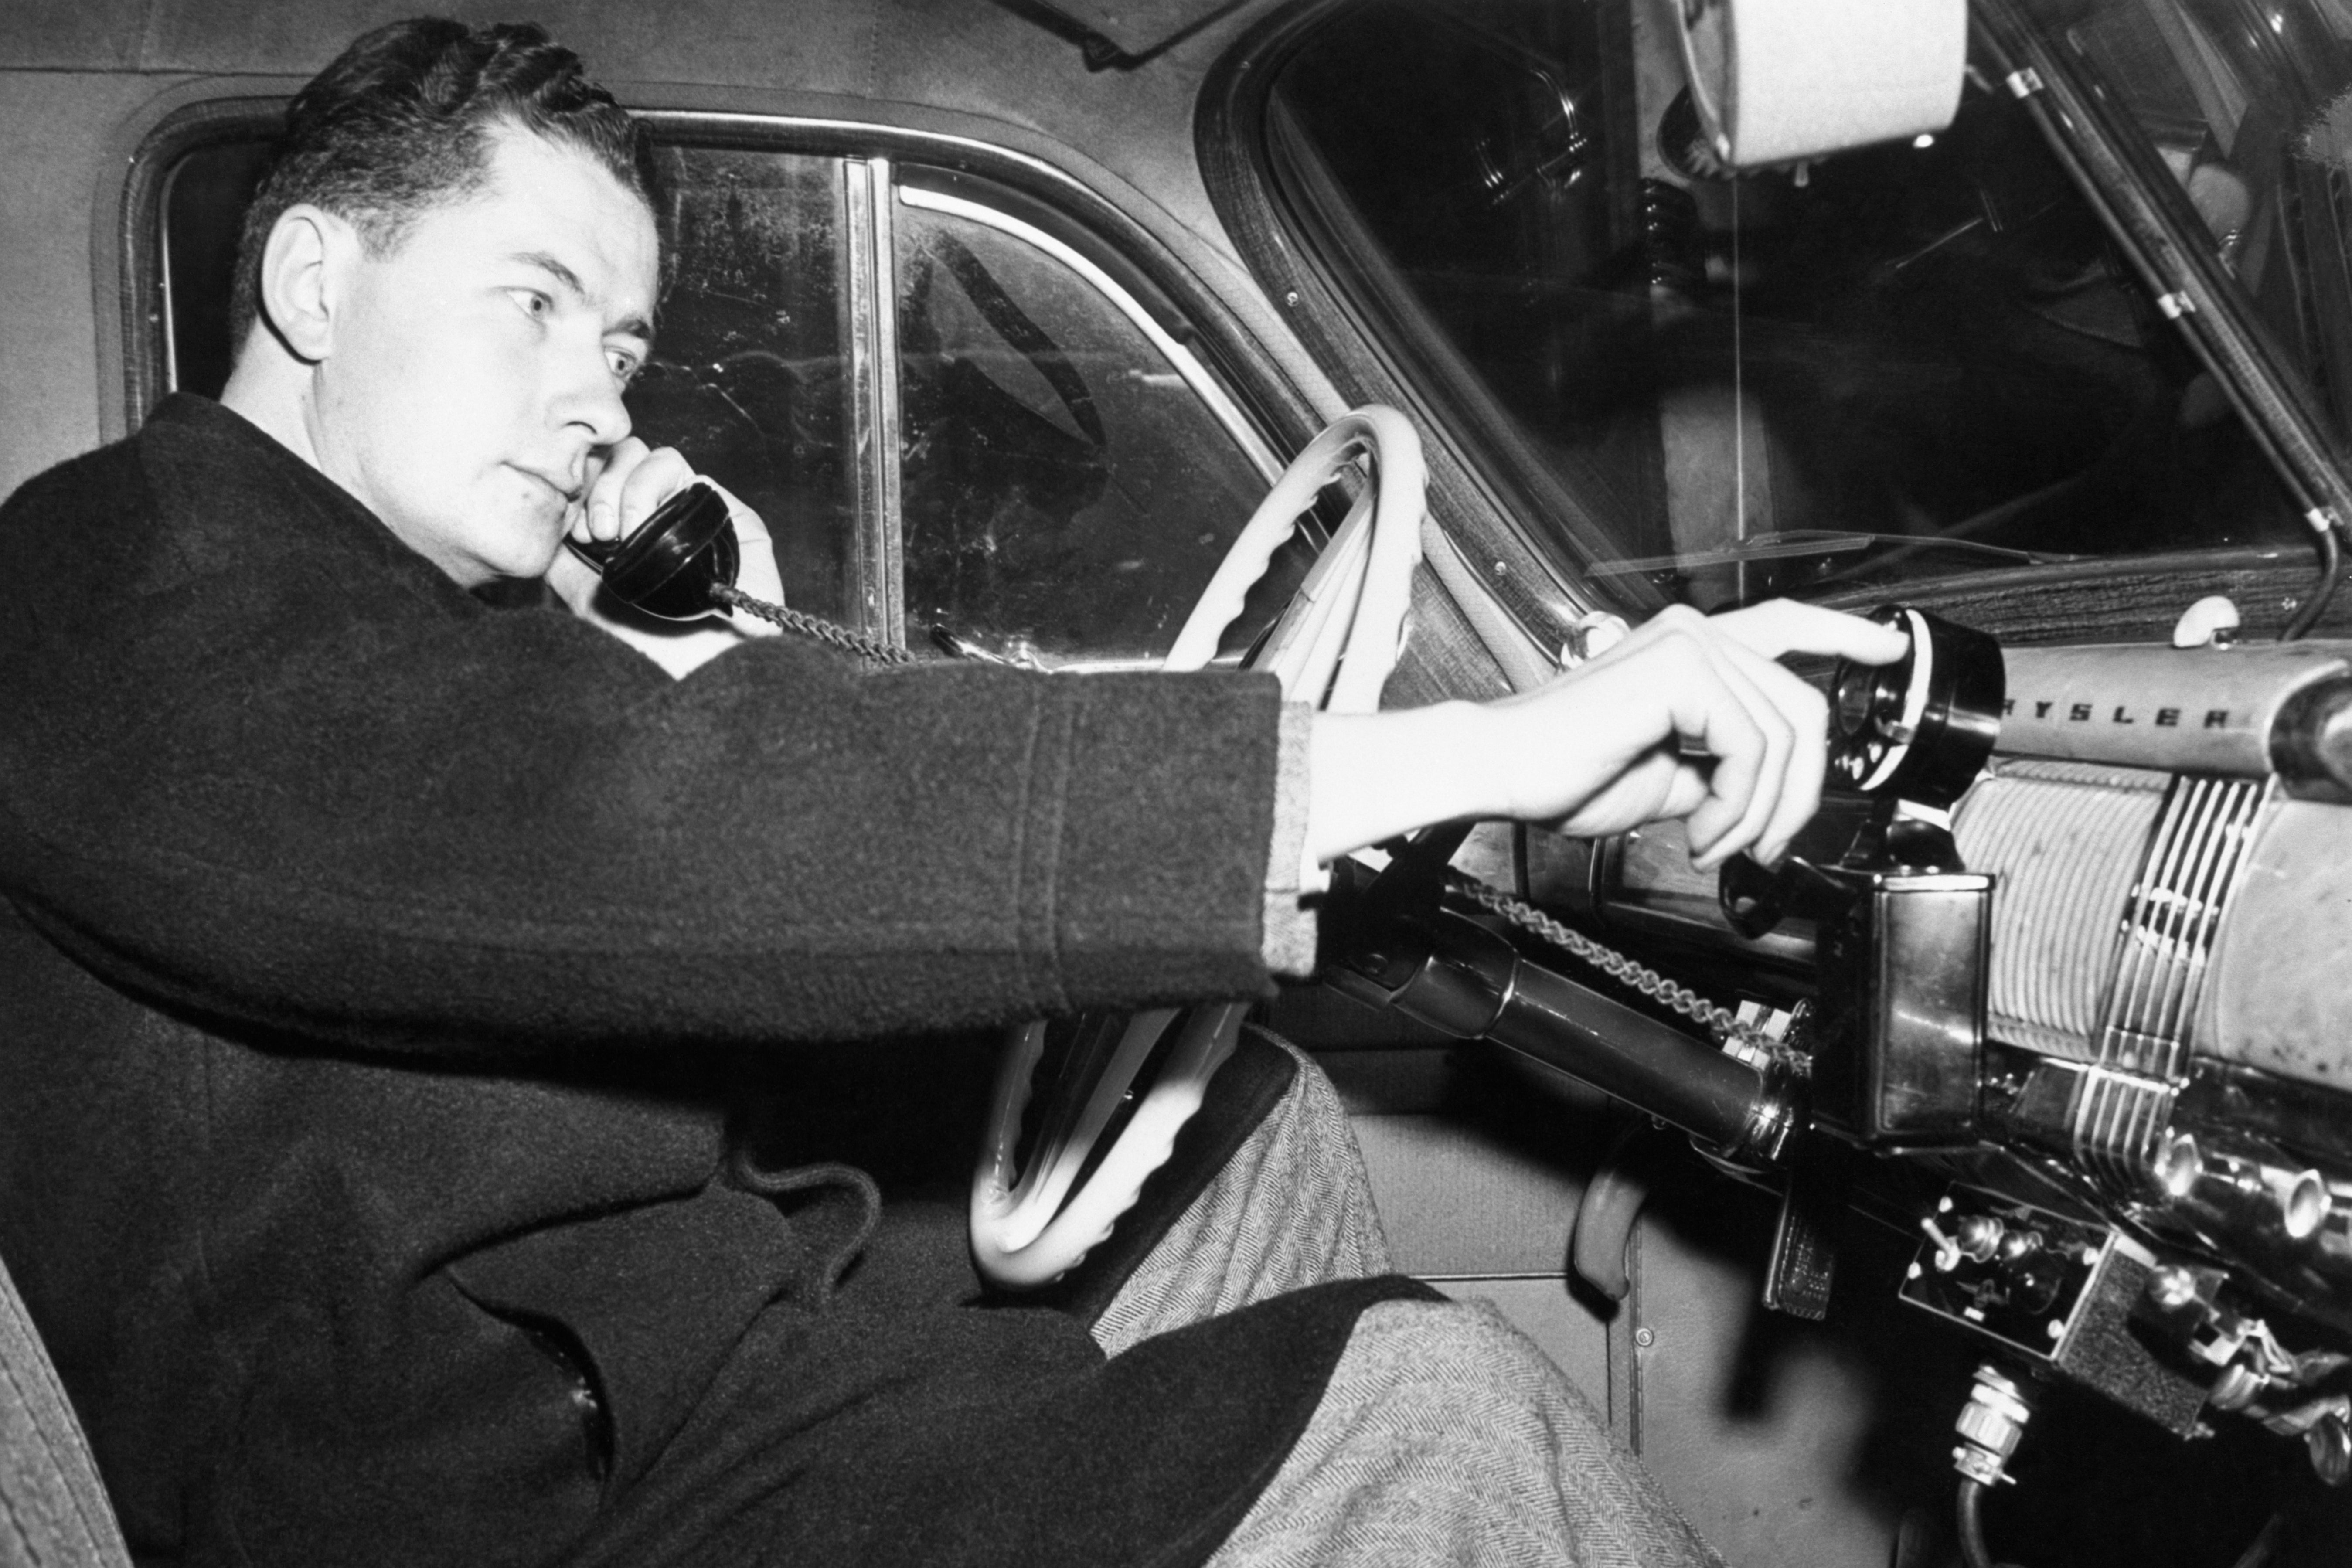 A man sits behind the wheel of a car with a phone to his ear as his finger uses a rotary dial.